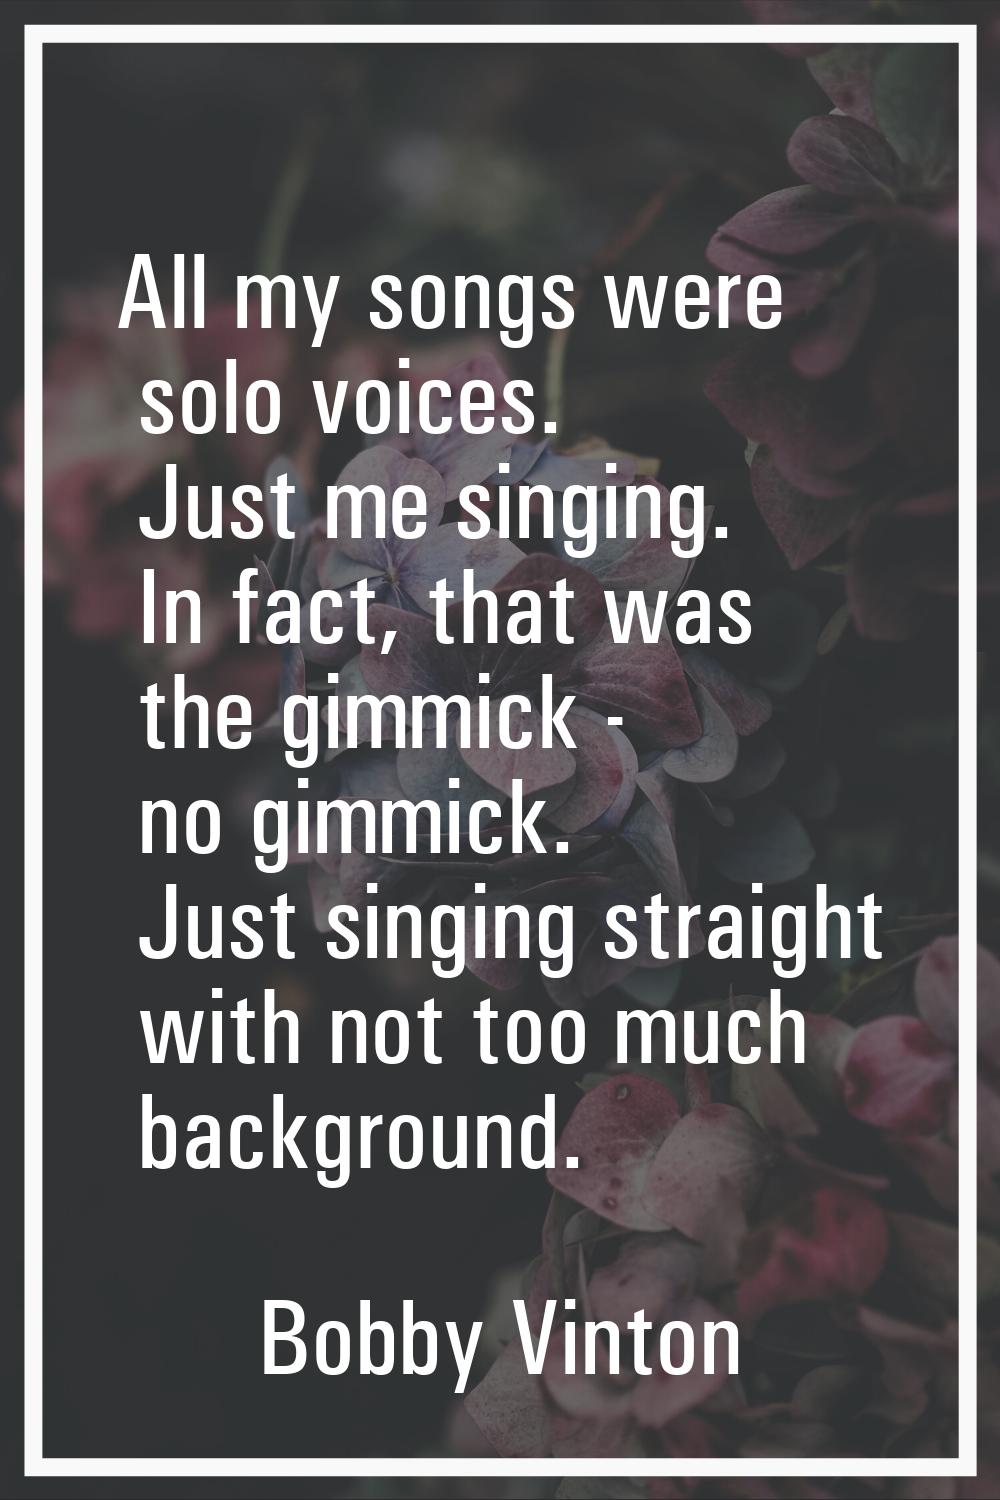 All my songs were solo voices. Just me singing. In fact, that was the gimmick - no gimmick. Just si